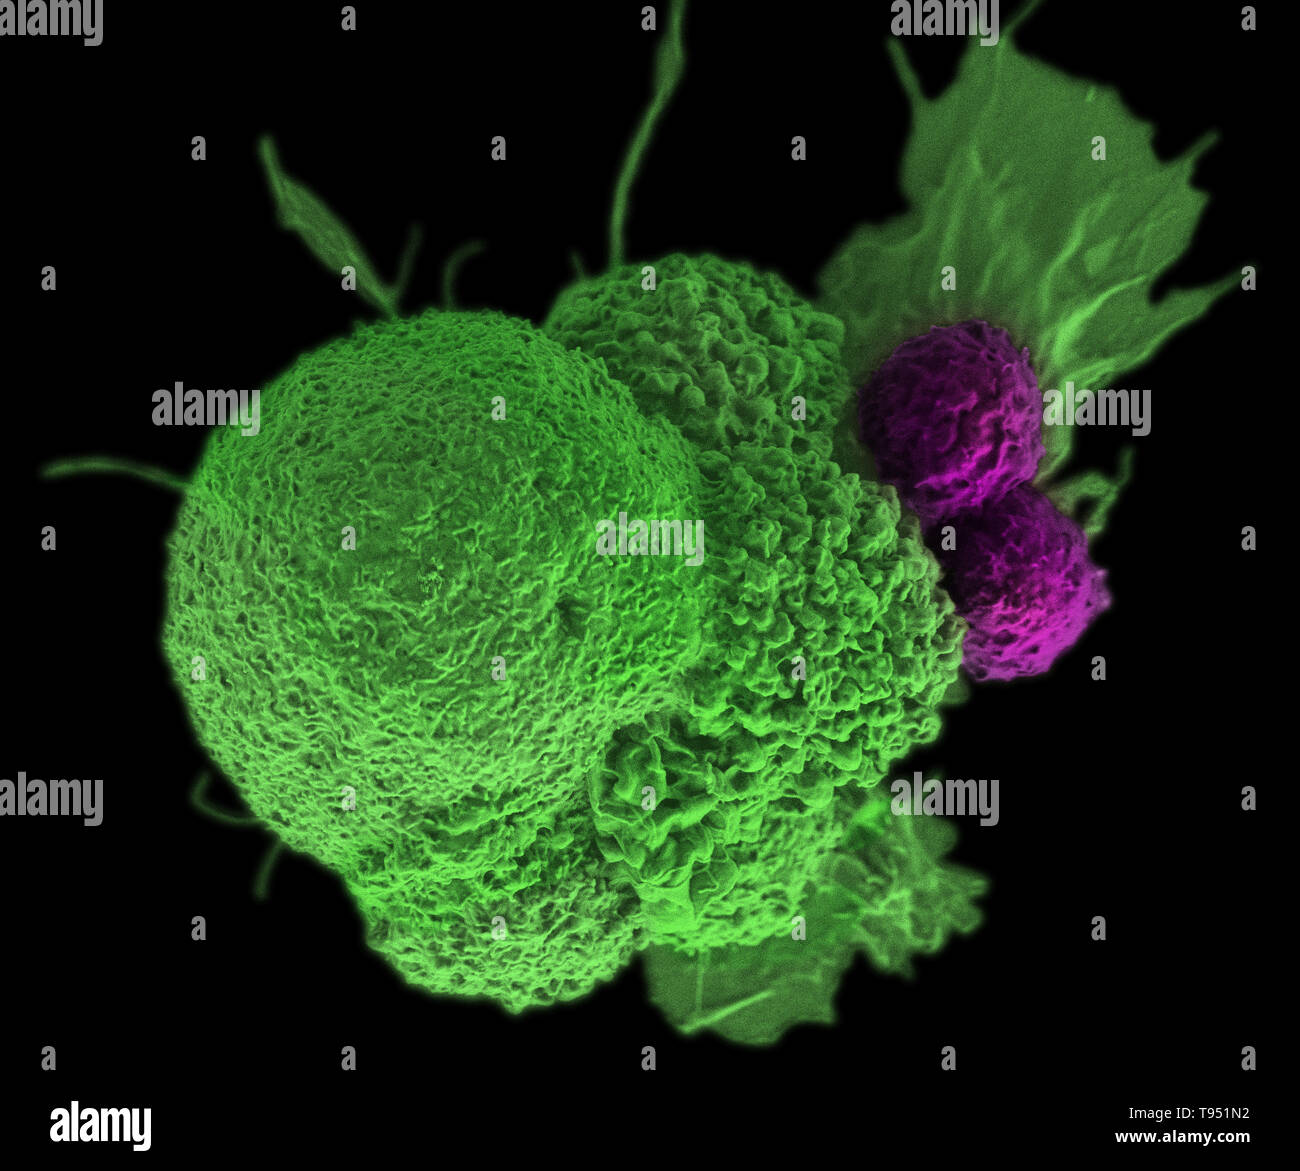 This electron micrograph (SEM) shows an oral squamous cancer cell (green) being attacked by two cytotoxic T cells (purple). The tumor-specific T cells were developed from the patient's own immune system, a personalized cancer vaccine like those that may be developed in the future with the help of NIST's standardized human genomes. This image has been colorized. Stock Photo